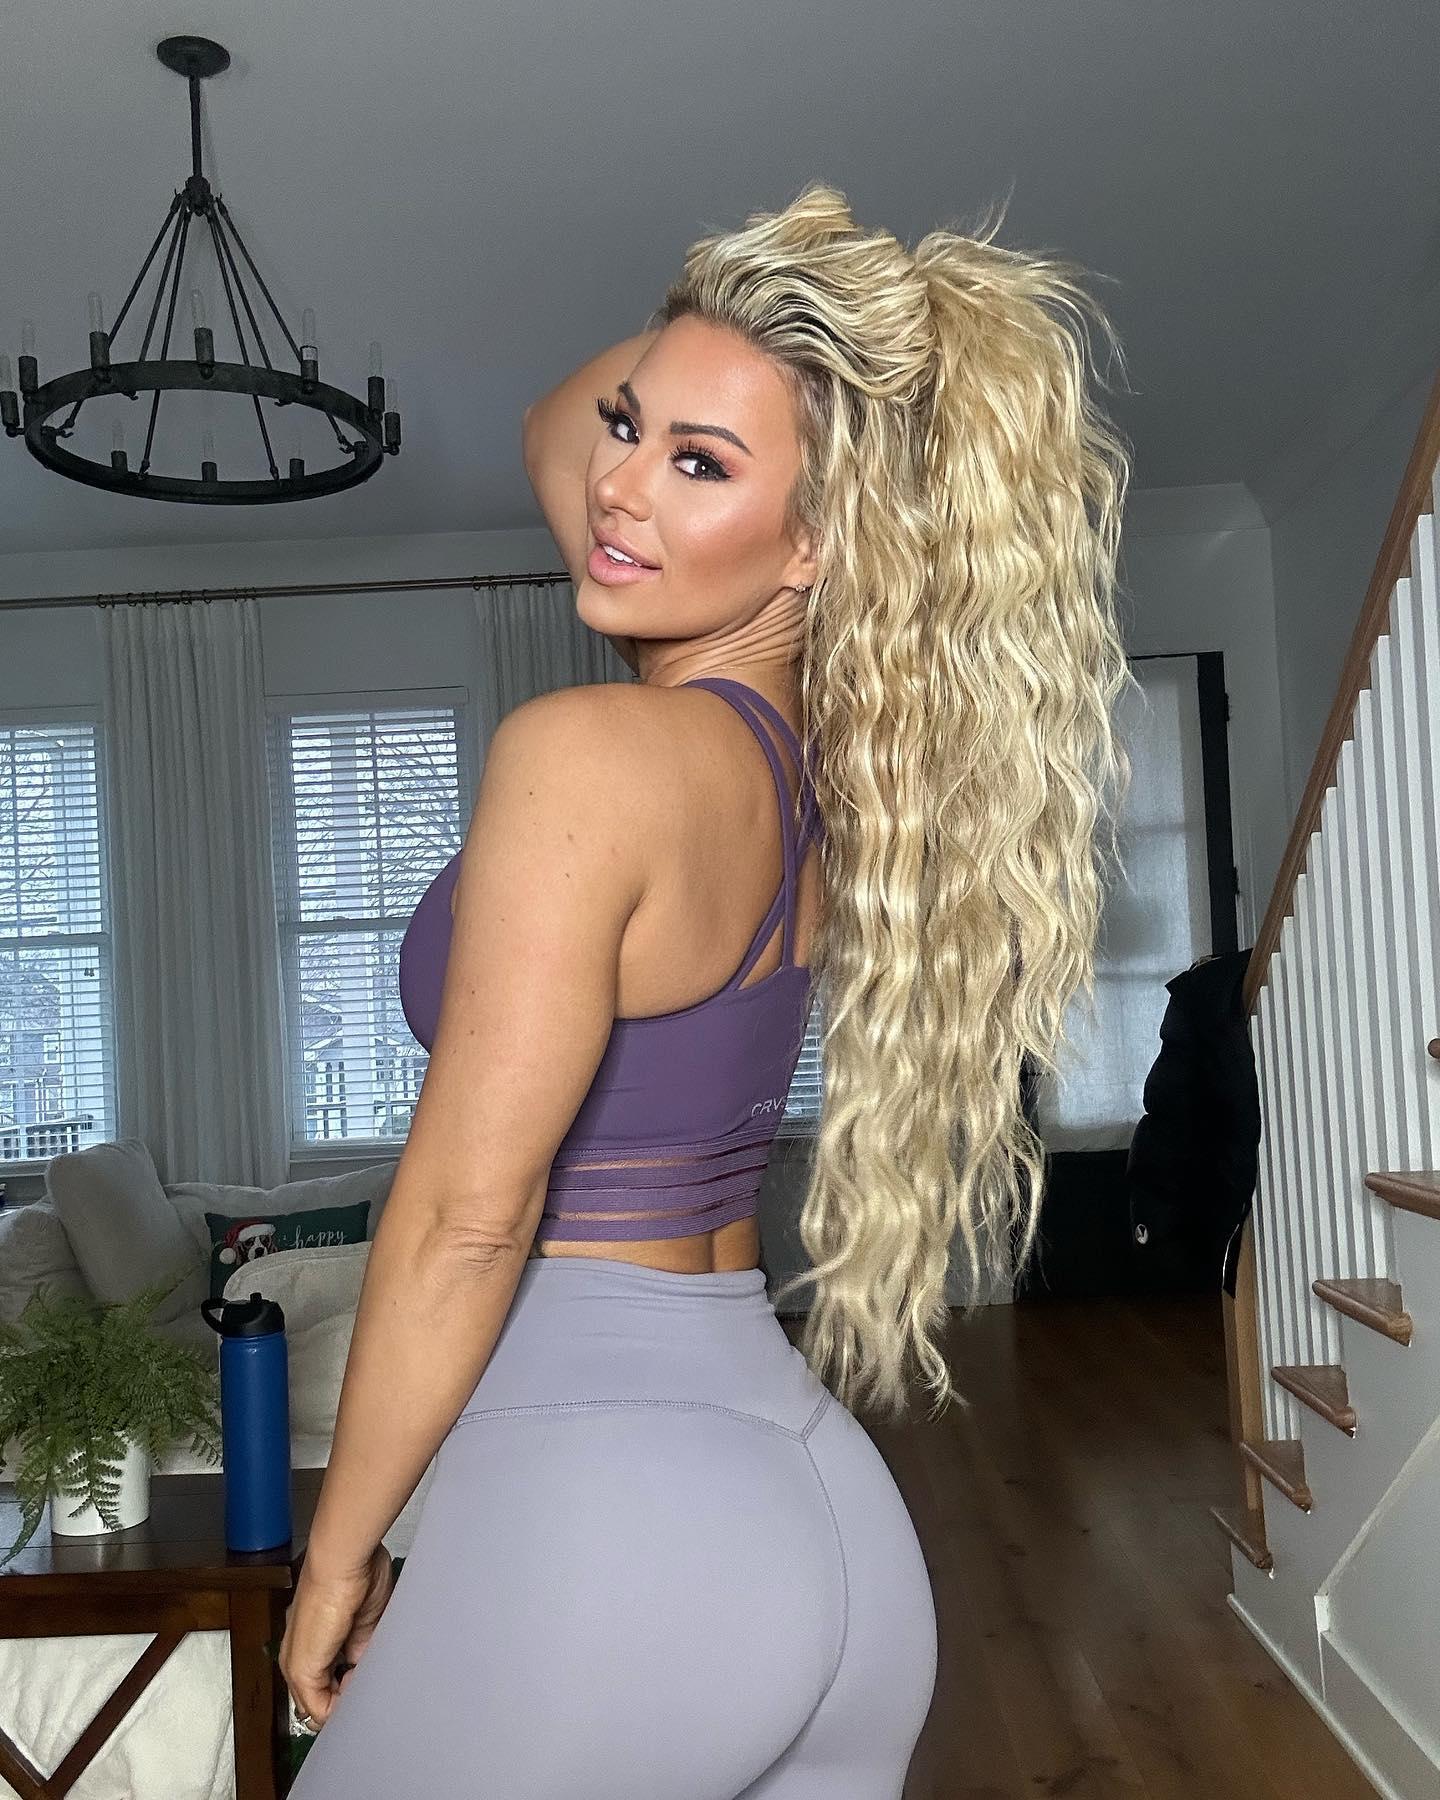 Kindly Myers shows off her new hair and a new outfit: a purple sports bra and gray CNC leggings